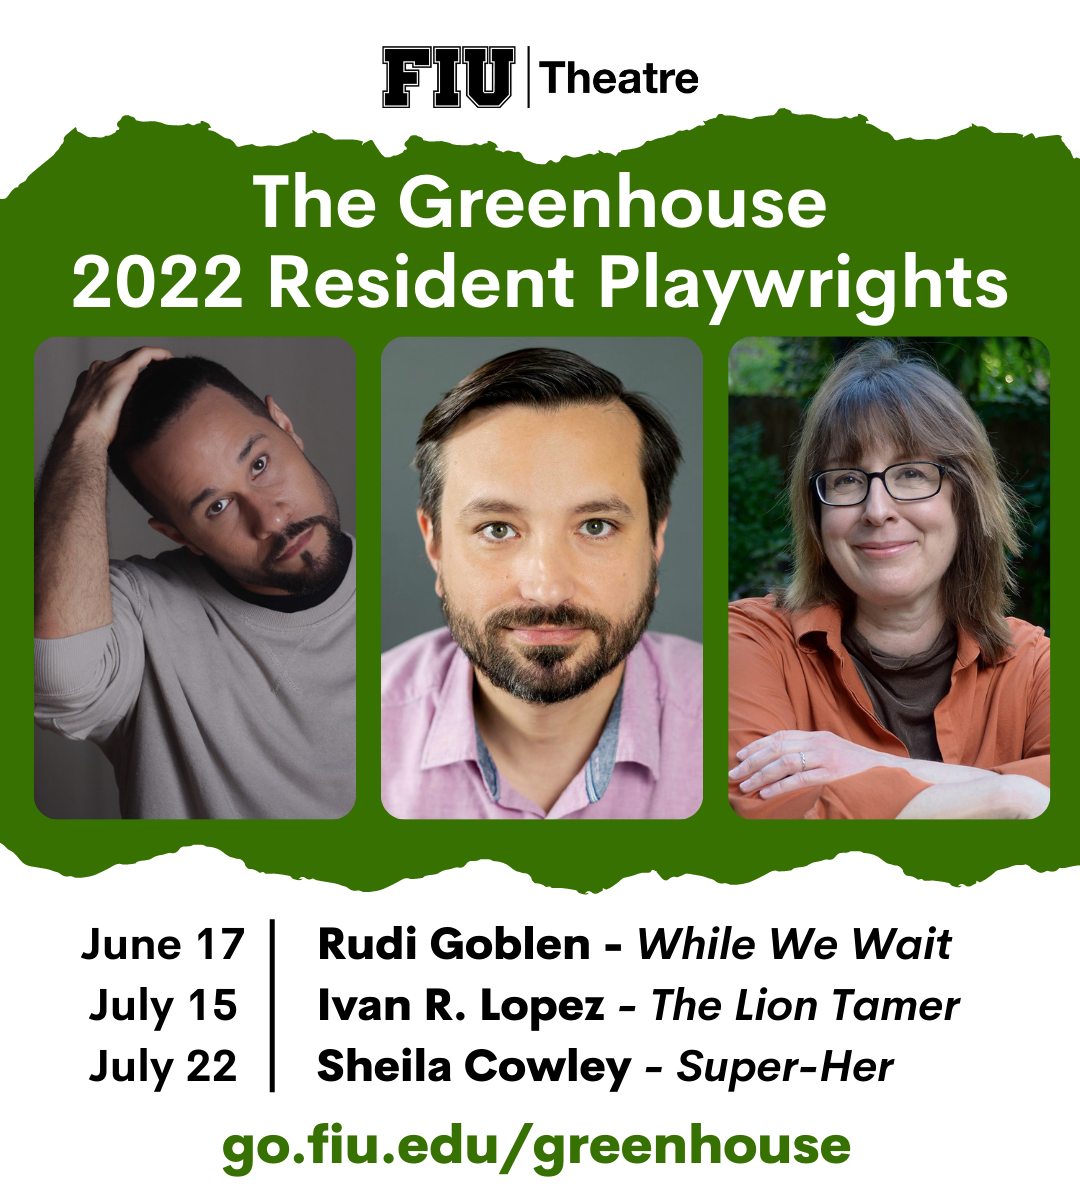 2022 Playwrights 1080 × 1200 px